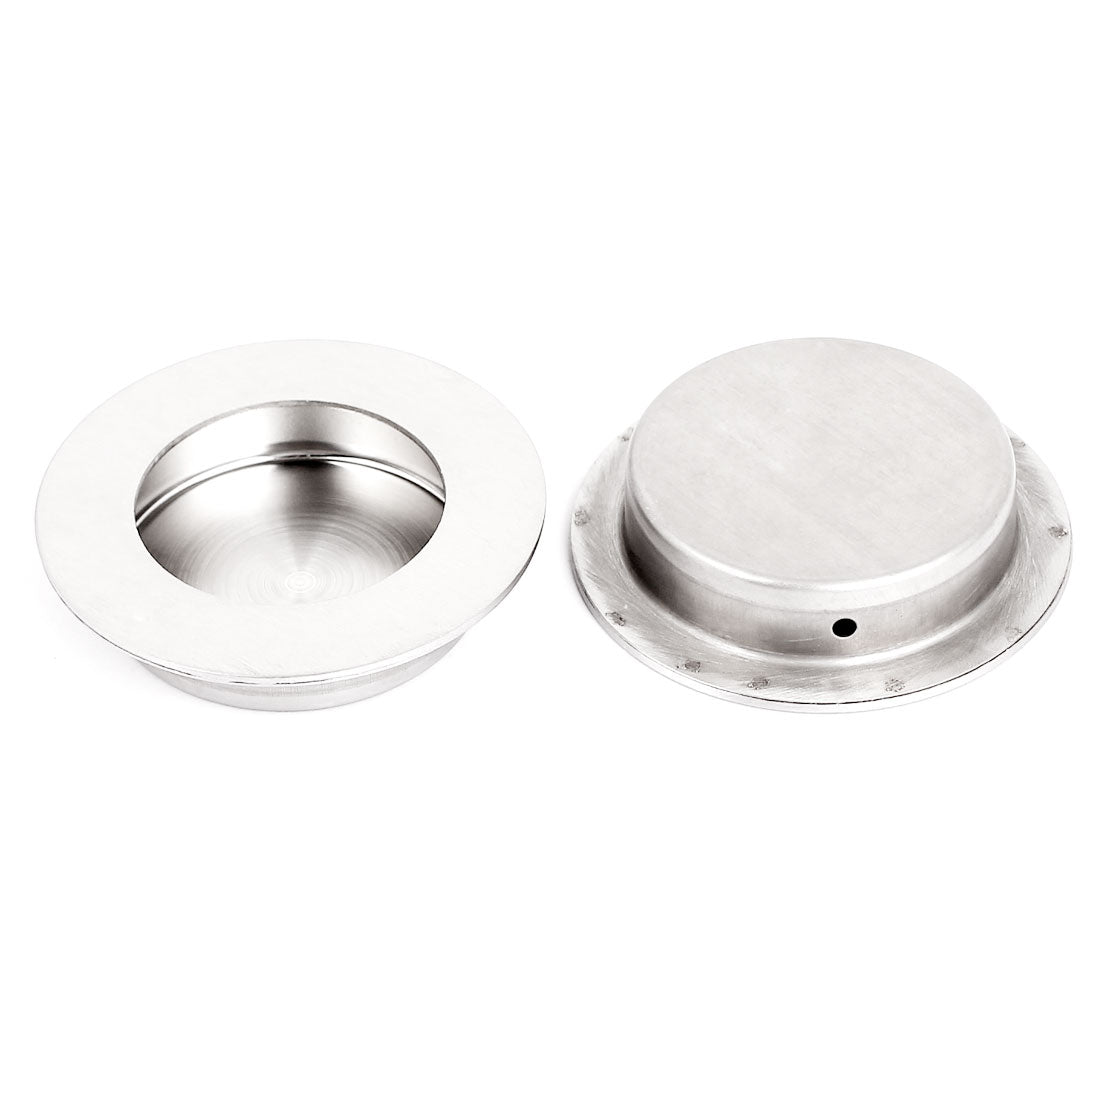 uxcell Uxcell Sliding Door Drawer Stainless Steel 65mm Round Recessed Flush Pull Handle 2pcs